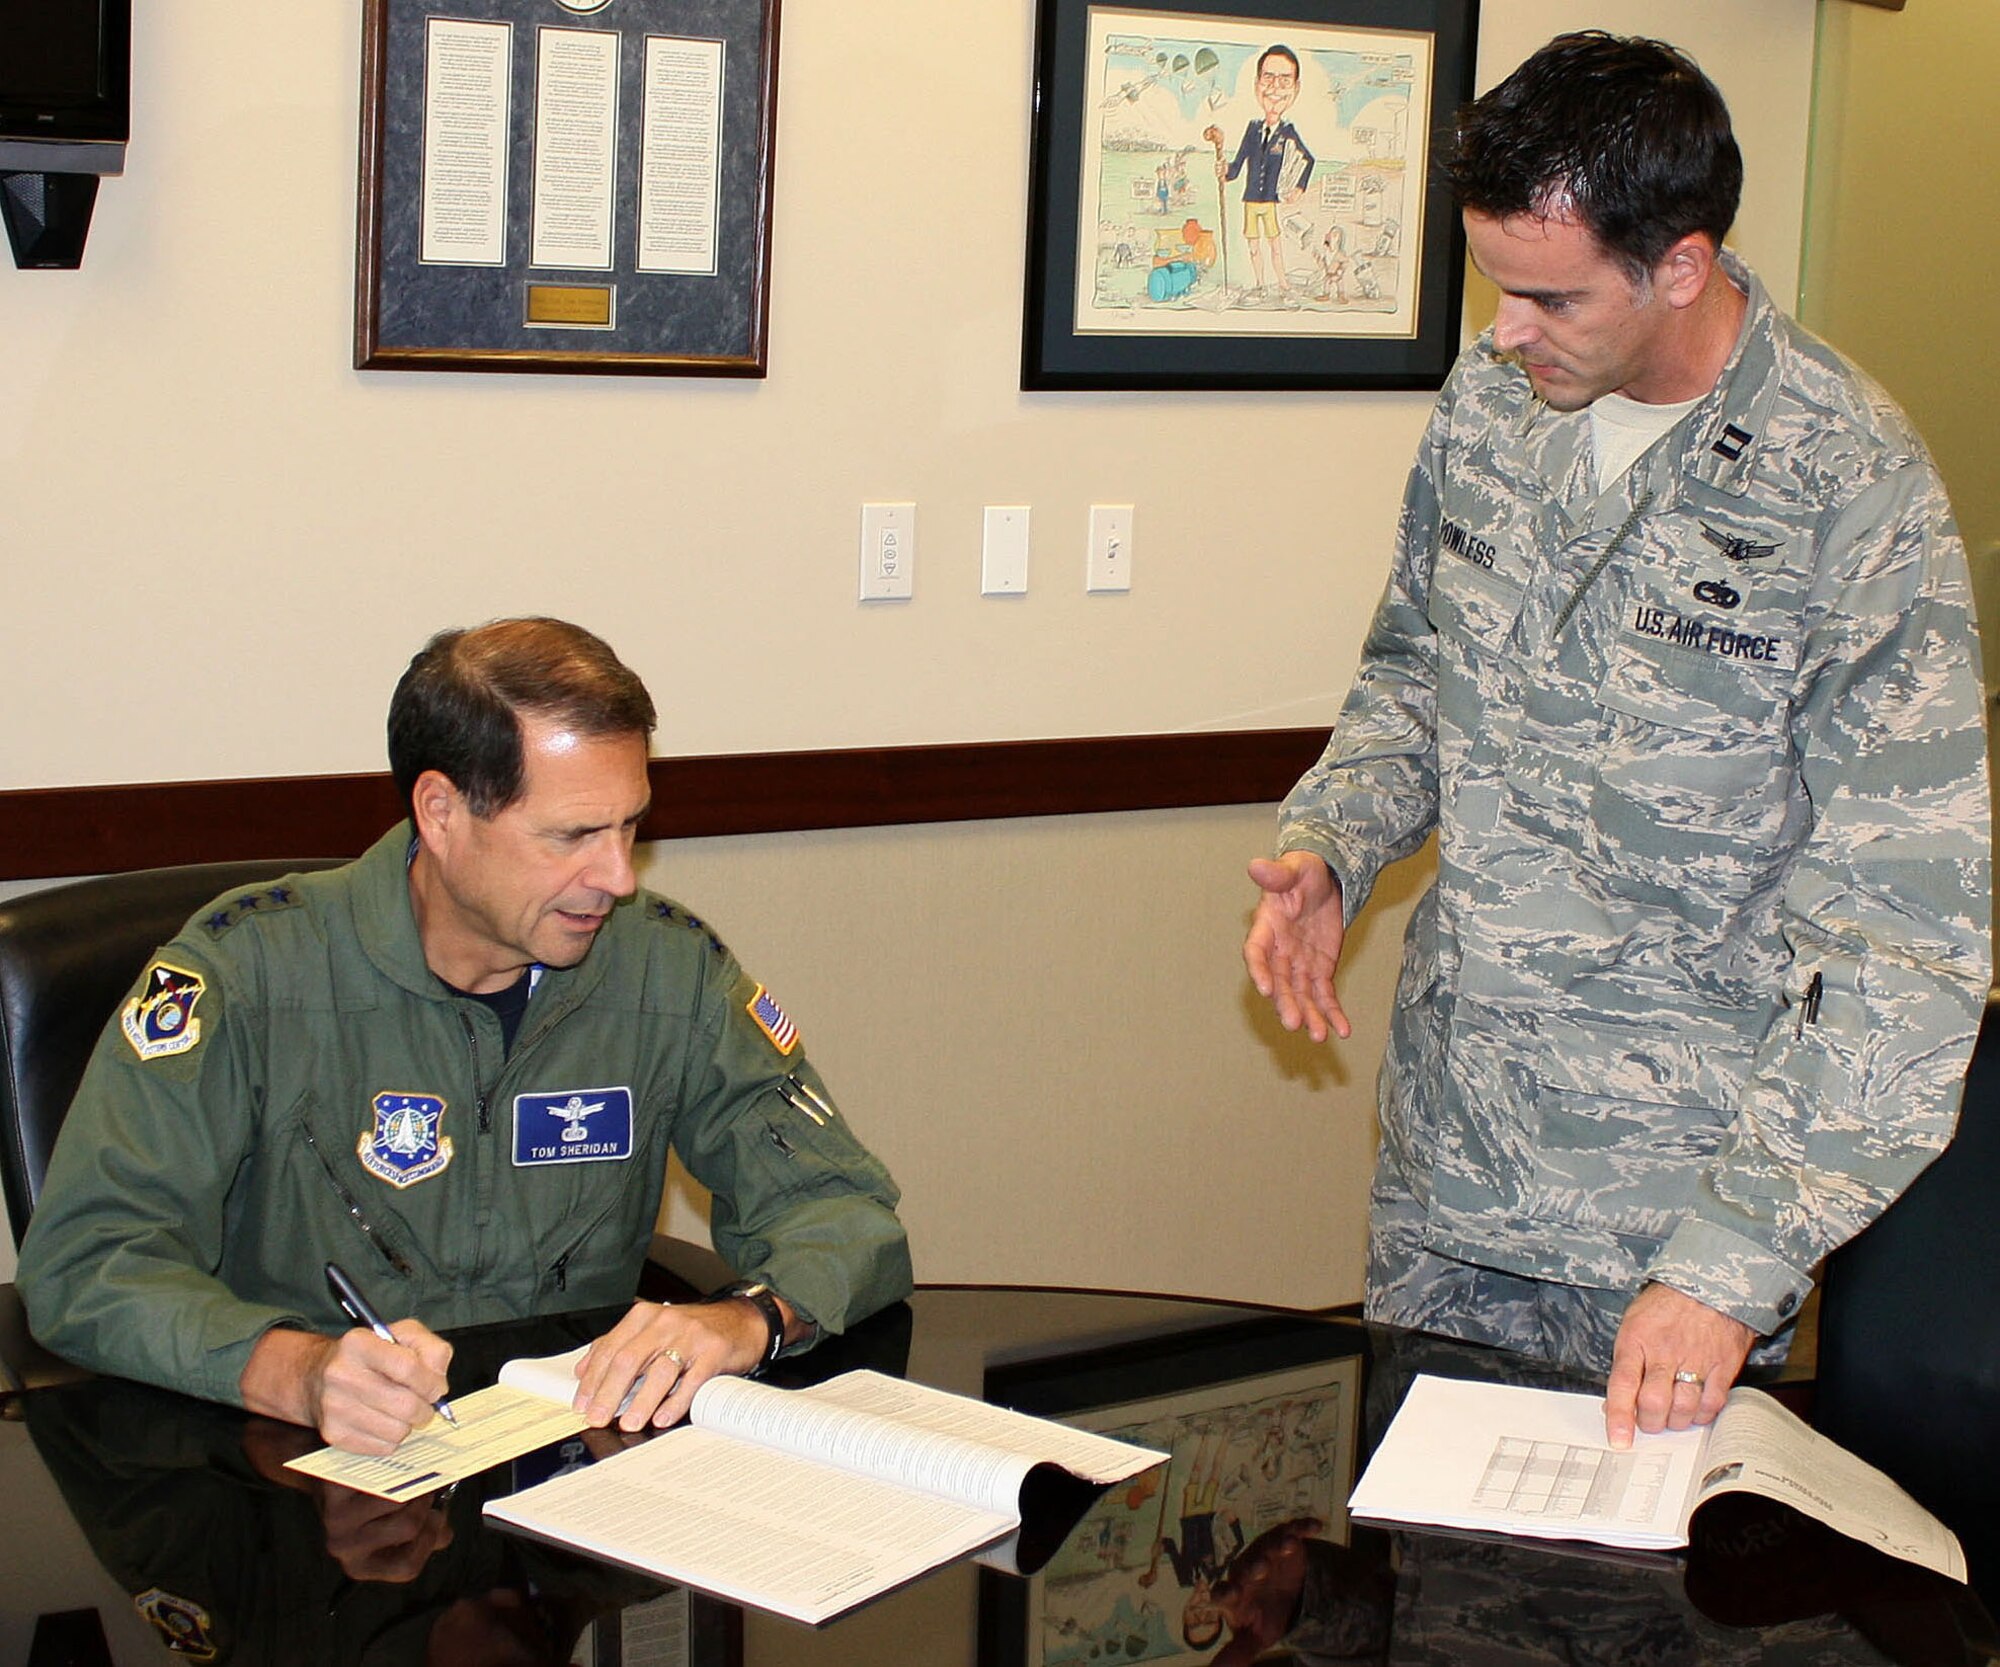 Lt. Gen. Tom Sheridan (left), Space and Missile Systems Center commander, fills out his 2009 Combined Federal Campaign contribution form, as CFC project officer Capt. Justin Powless, SMC Program and Integration, looks on, Dec. 4. As of week 4, the Los Angeles Air Force Base has made 100 percent contact and raised 51 percent of the contribution goal. This year’s CFC campaign began Nov. 4 and ends on Dec. 15. For further information, contact Captain Powless at 310-653-1269. (Photo by 1st Lt. Matt Nelson)